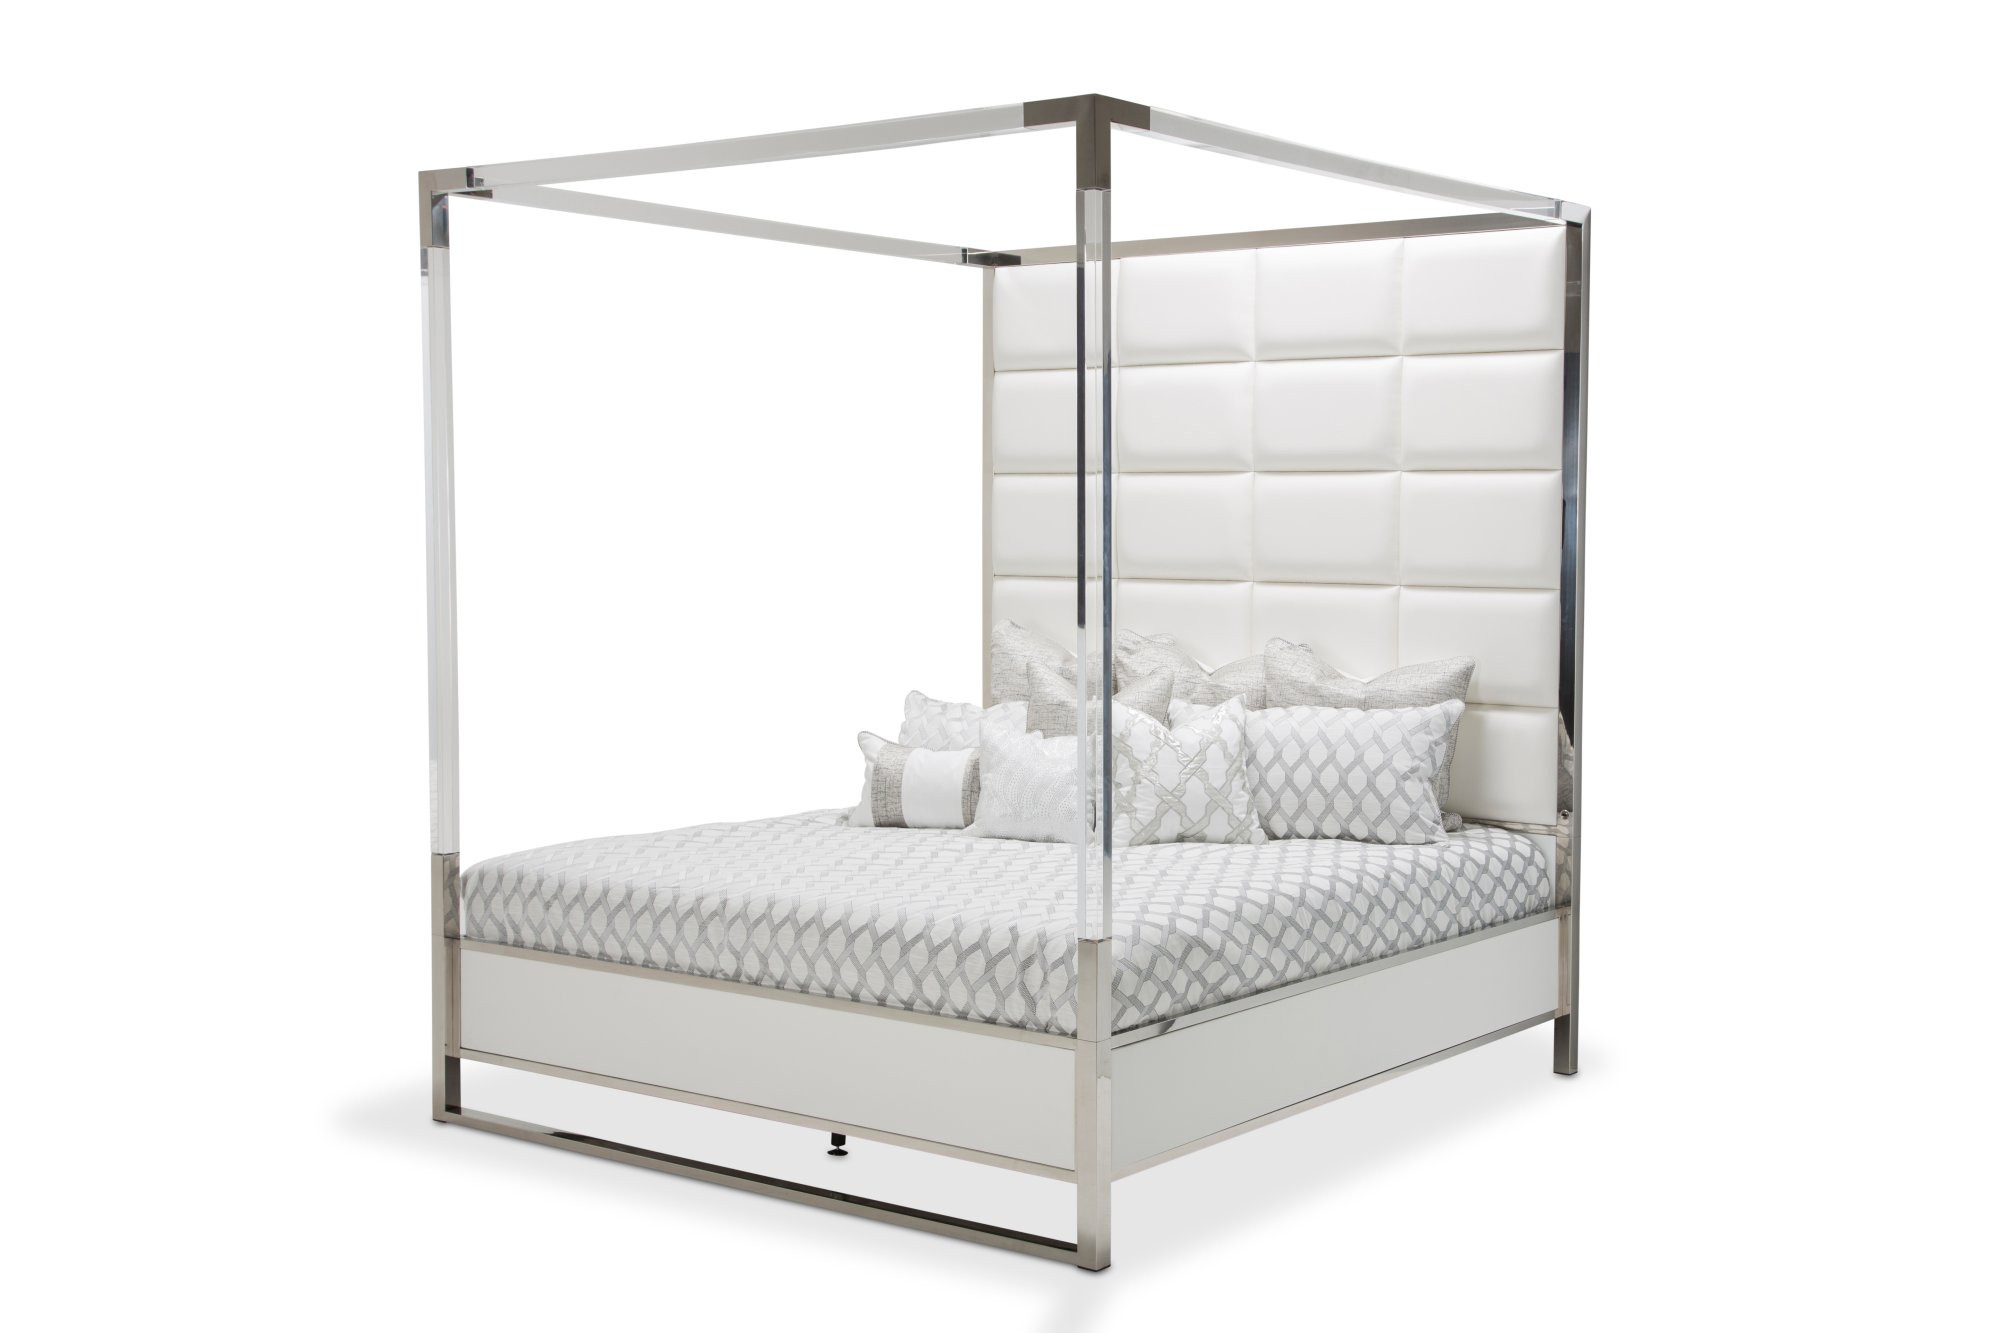 Cal King Metal Canopy Bed State, King Canopy Bed Frame